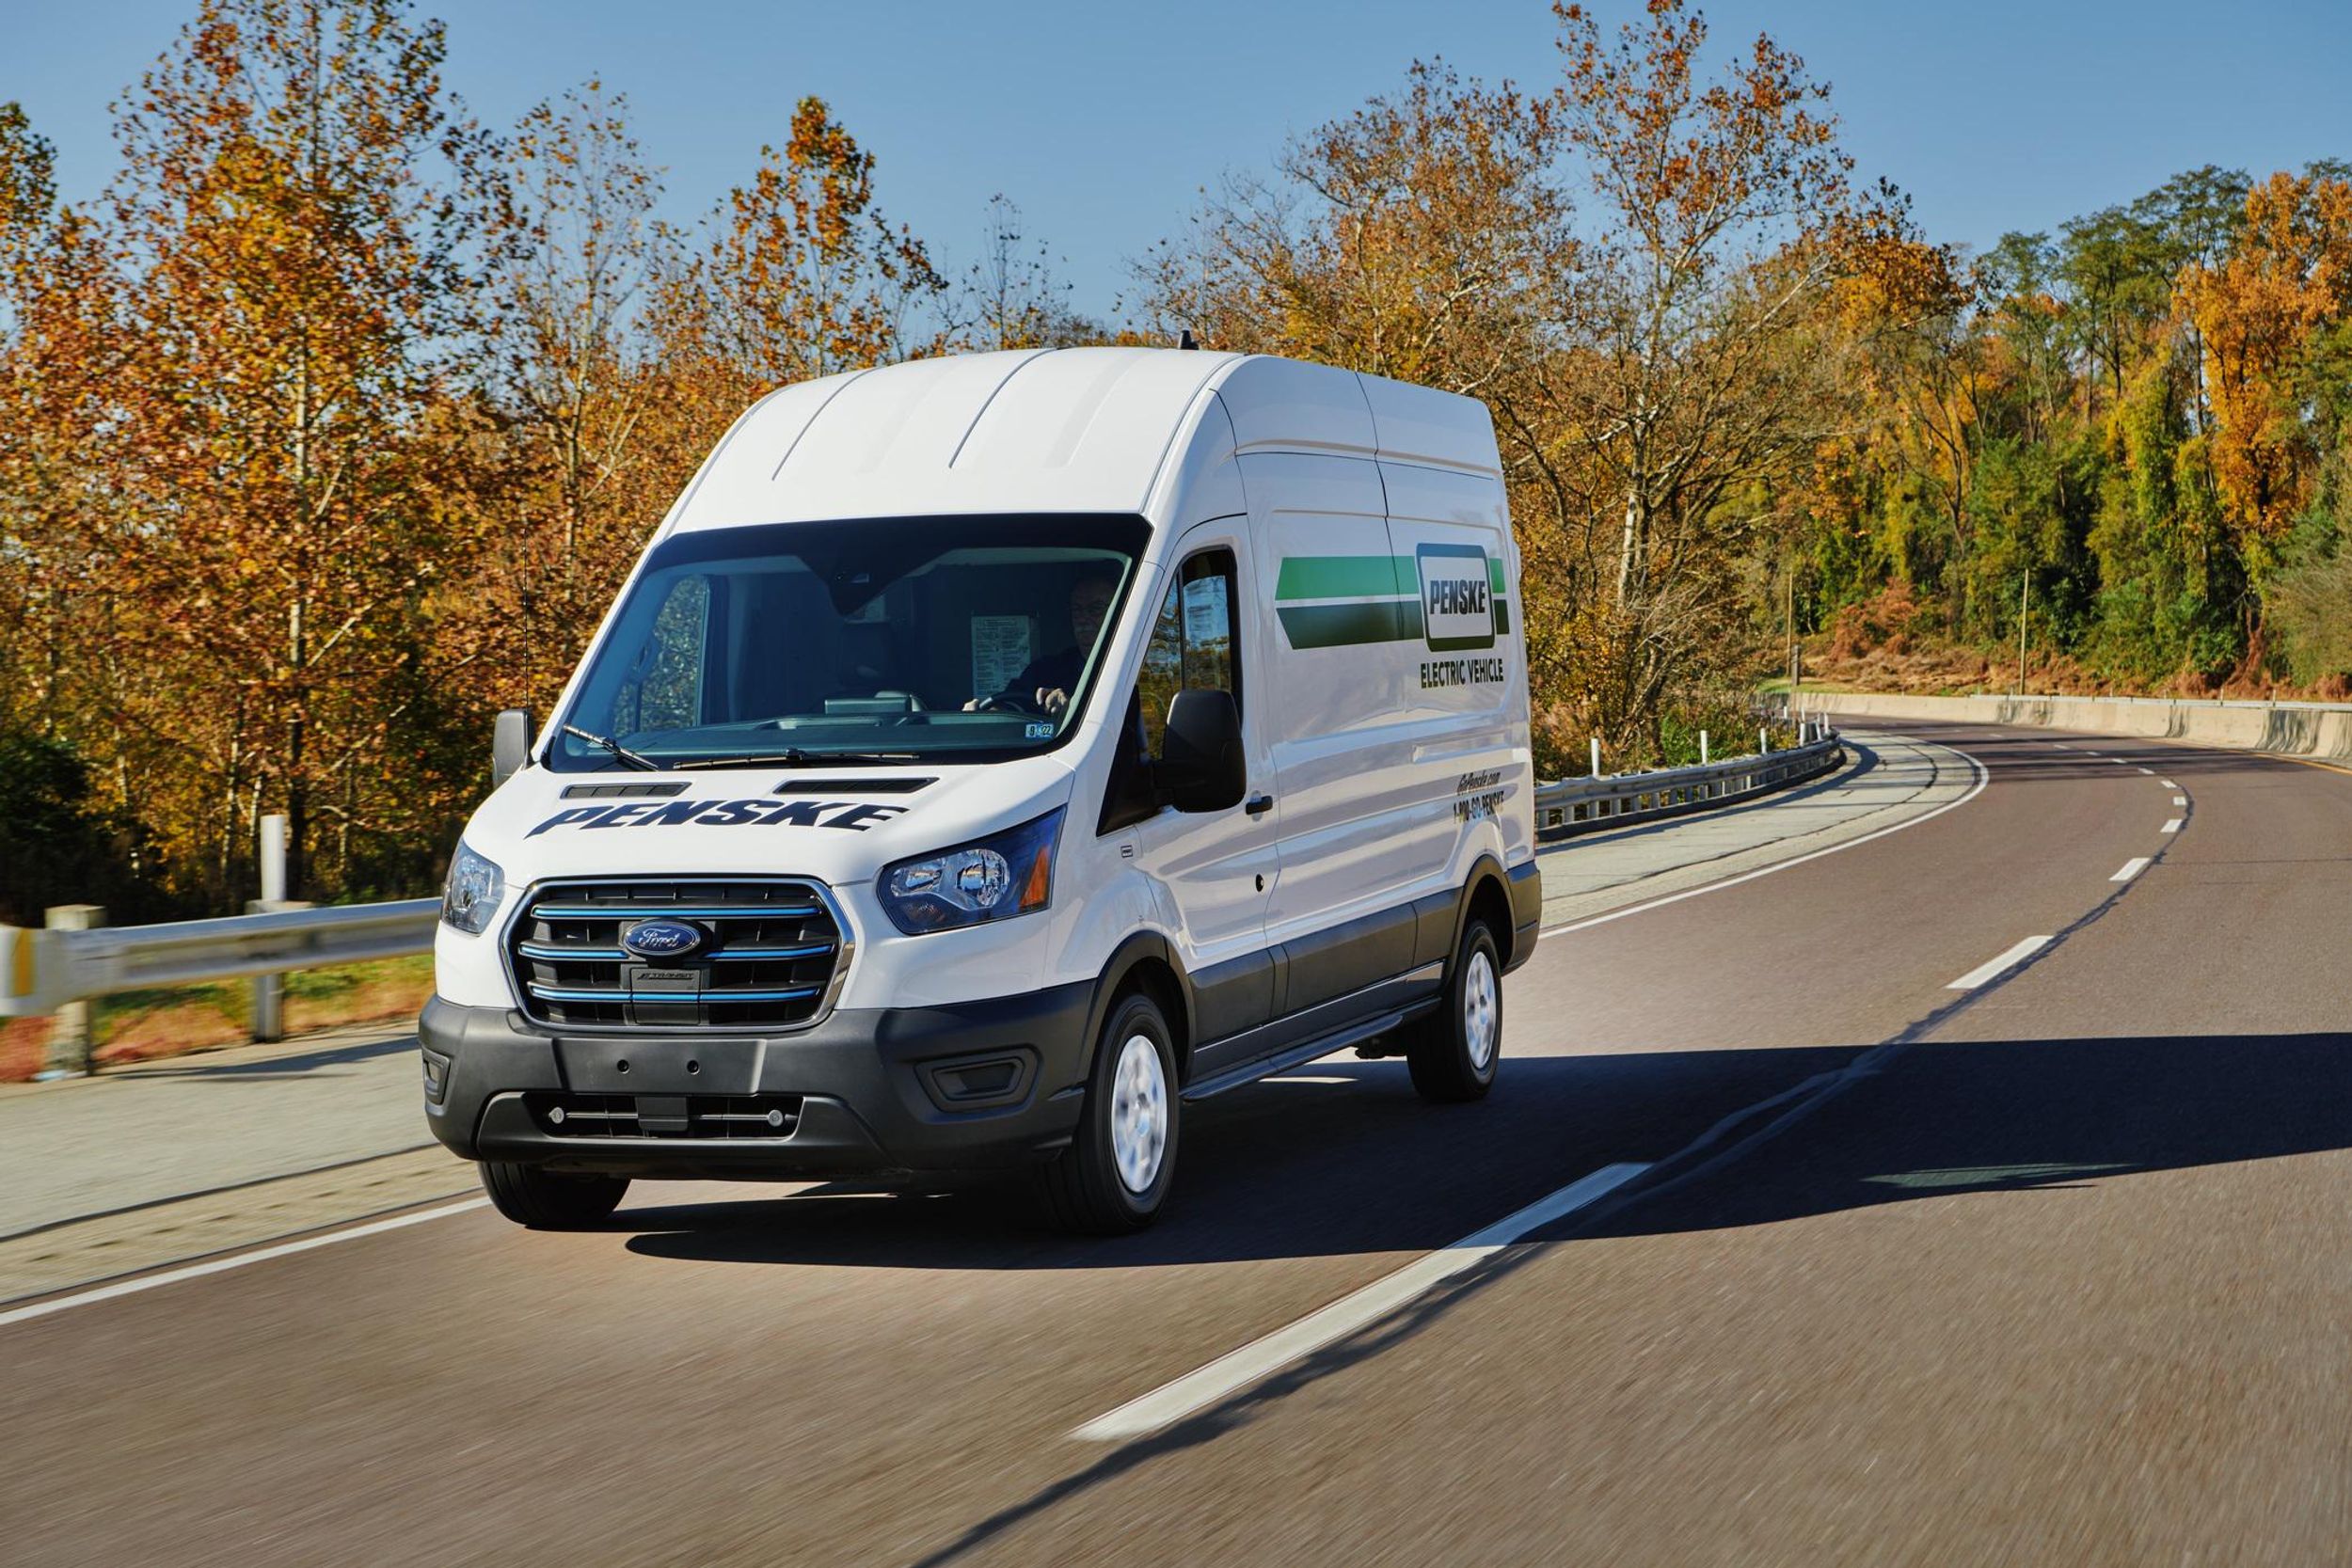 Penske Truck Leasing has ordered 750 all-electric Ford E-Transit cargo vans.